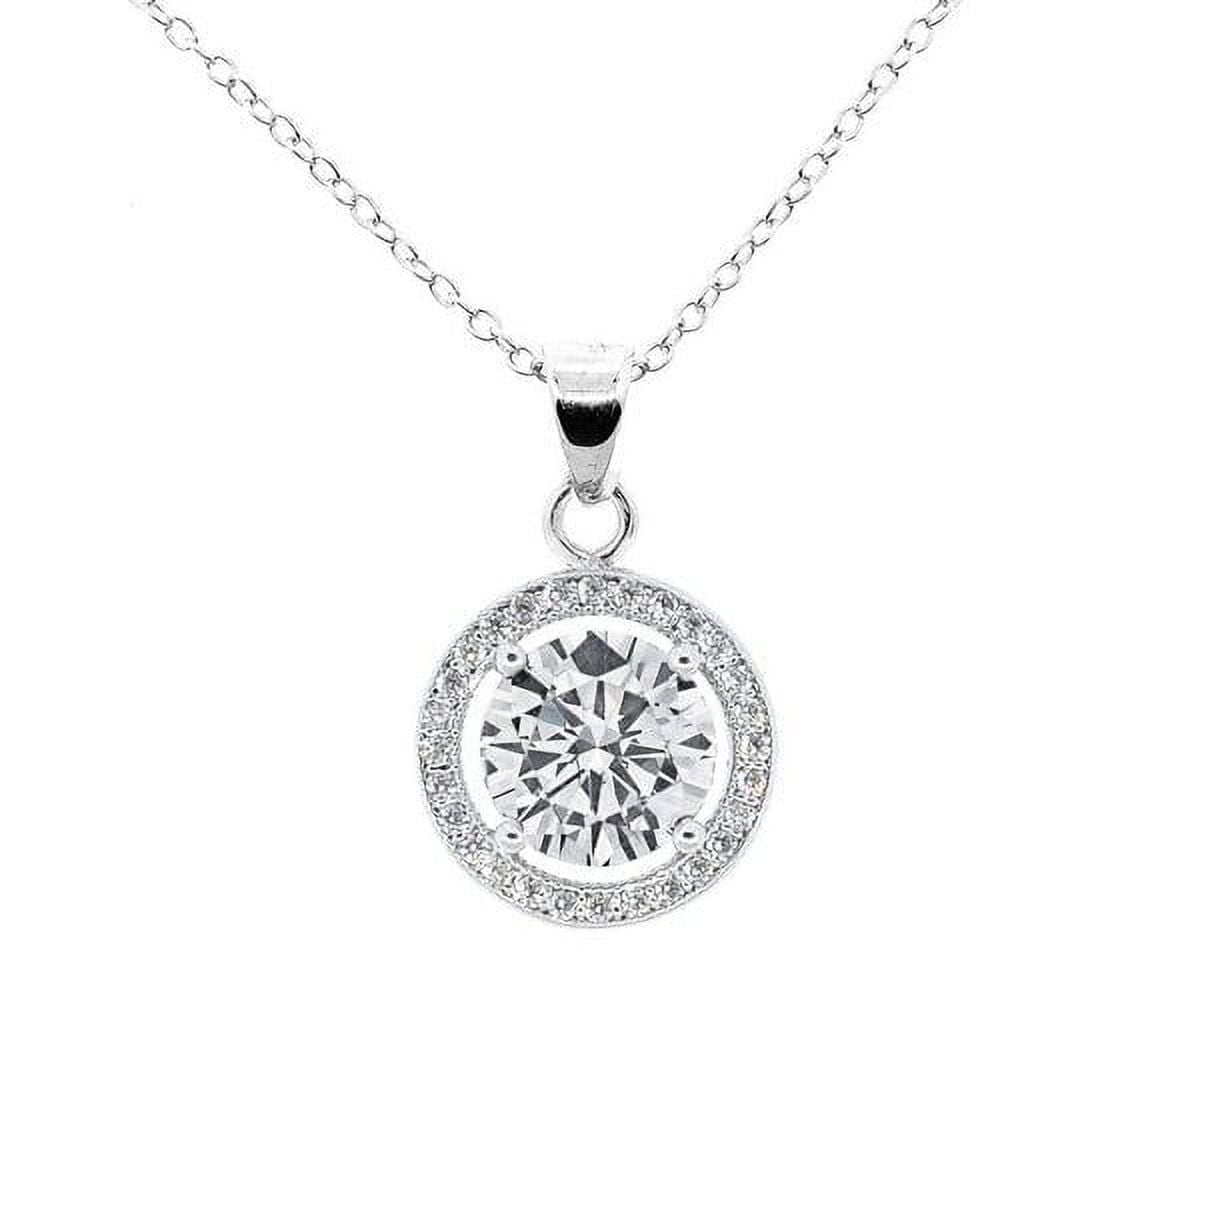 Cate & Chloe Blake 18k White Gold Plated Silver Halo Necklace